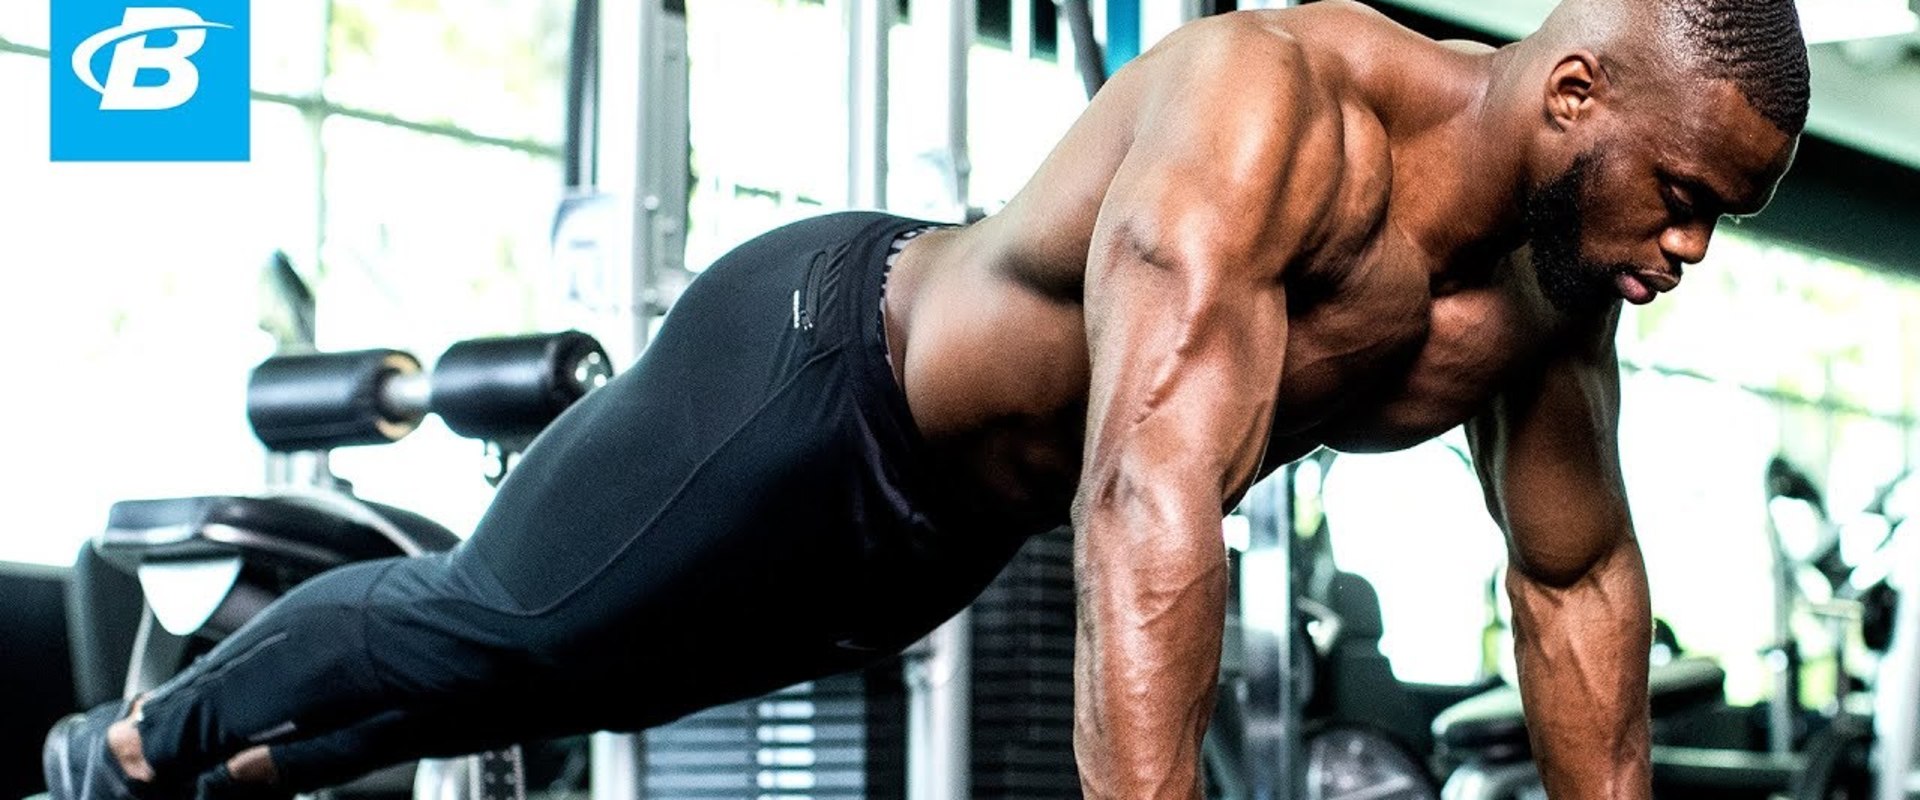 What are the best gym workouts for building muscle?